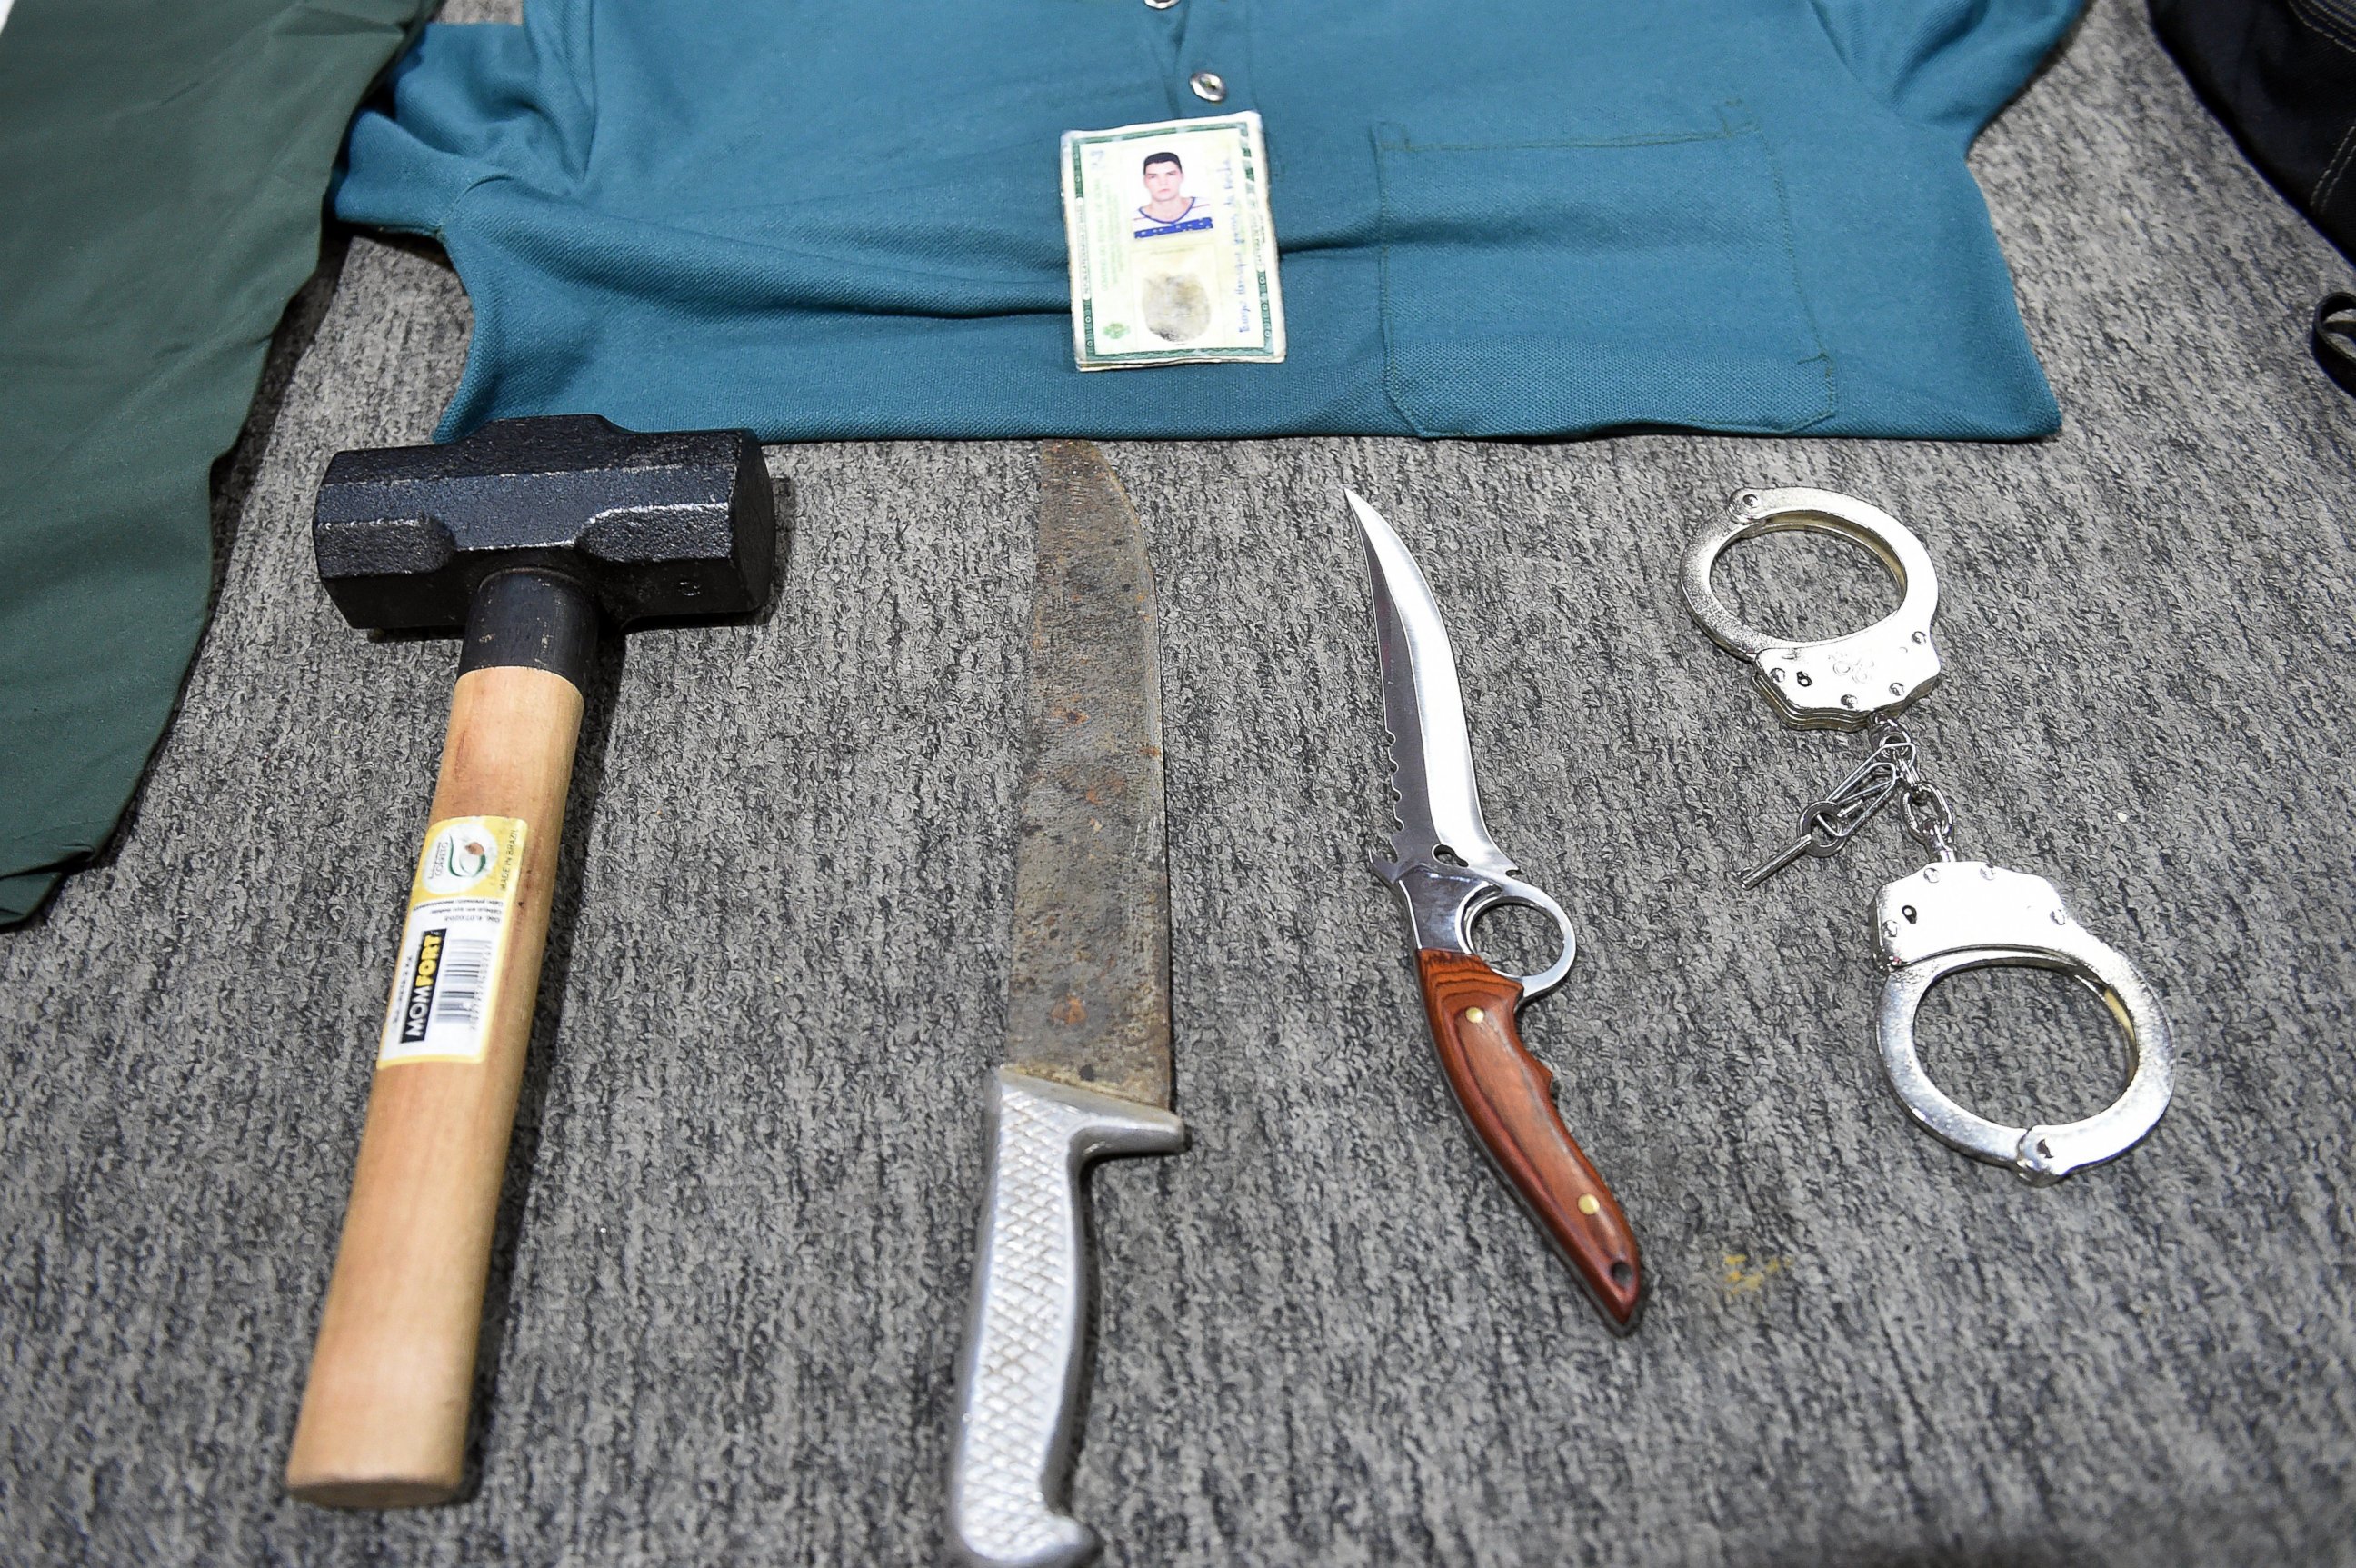 PHOTO: Picture of objects seized during the arrest of alleged serial killer Tiago Gomes da Rocha, suspected of killing 39 people, at the Department of Security in Goiania,Brazil, on Oct. 16, 2014.